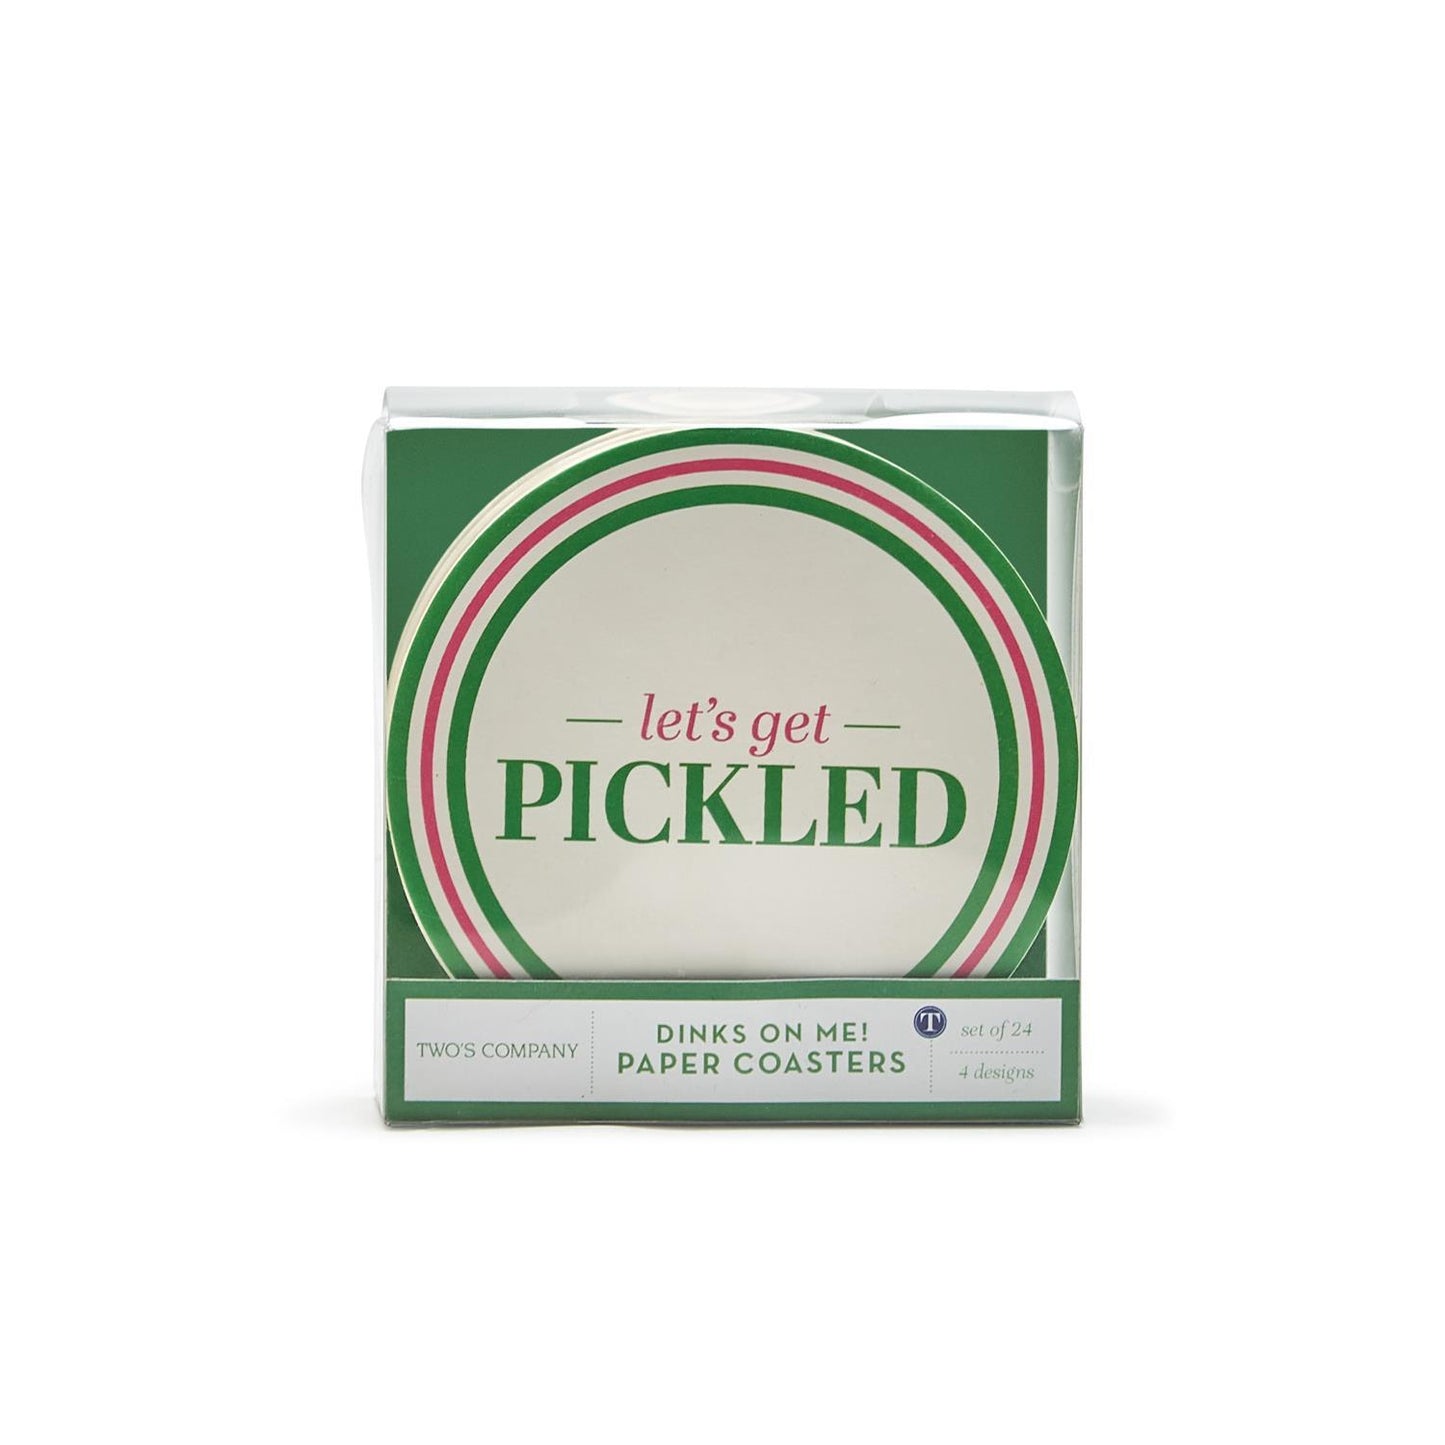 Pickleball Set of 24 Paper Coasters in Gift Box